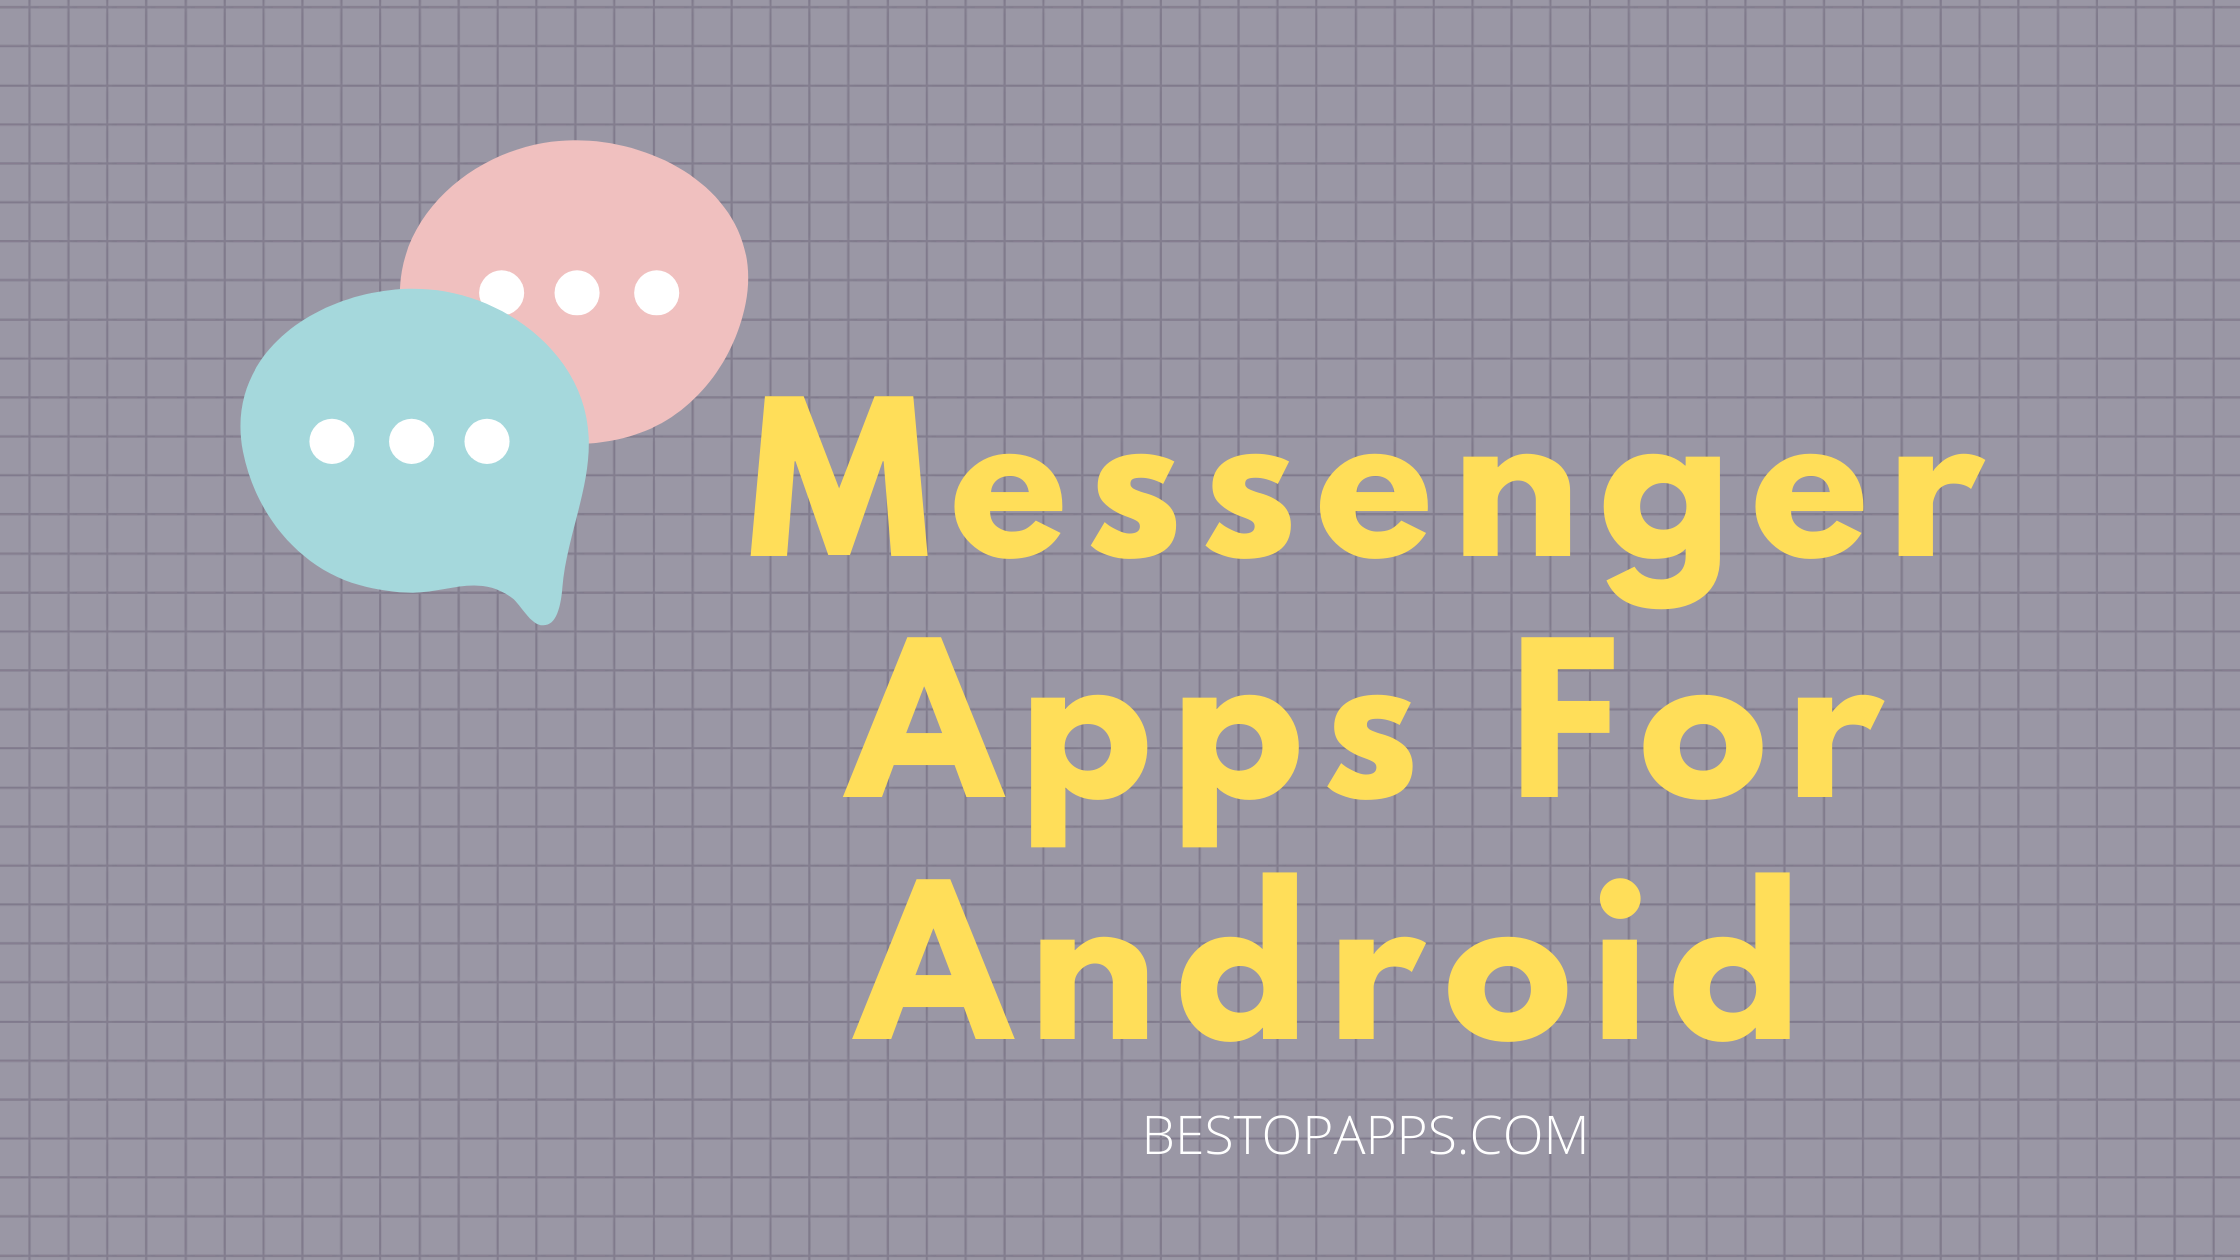 Messenger Apps For Android